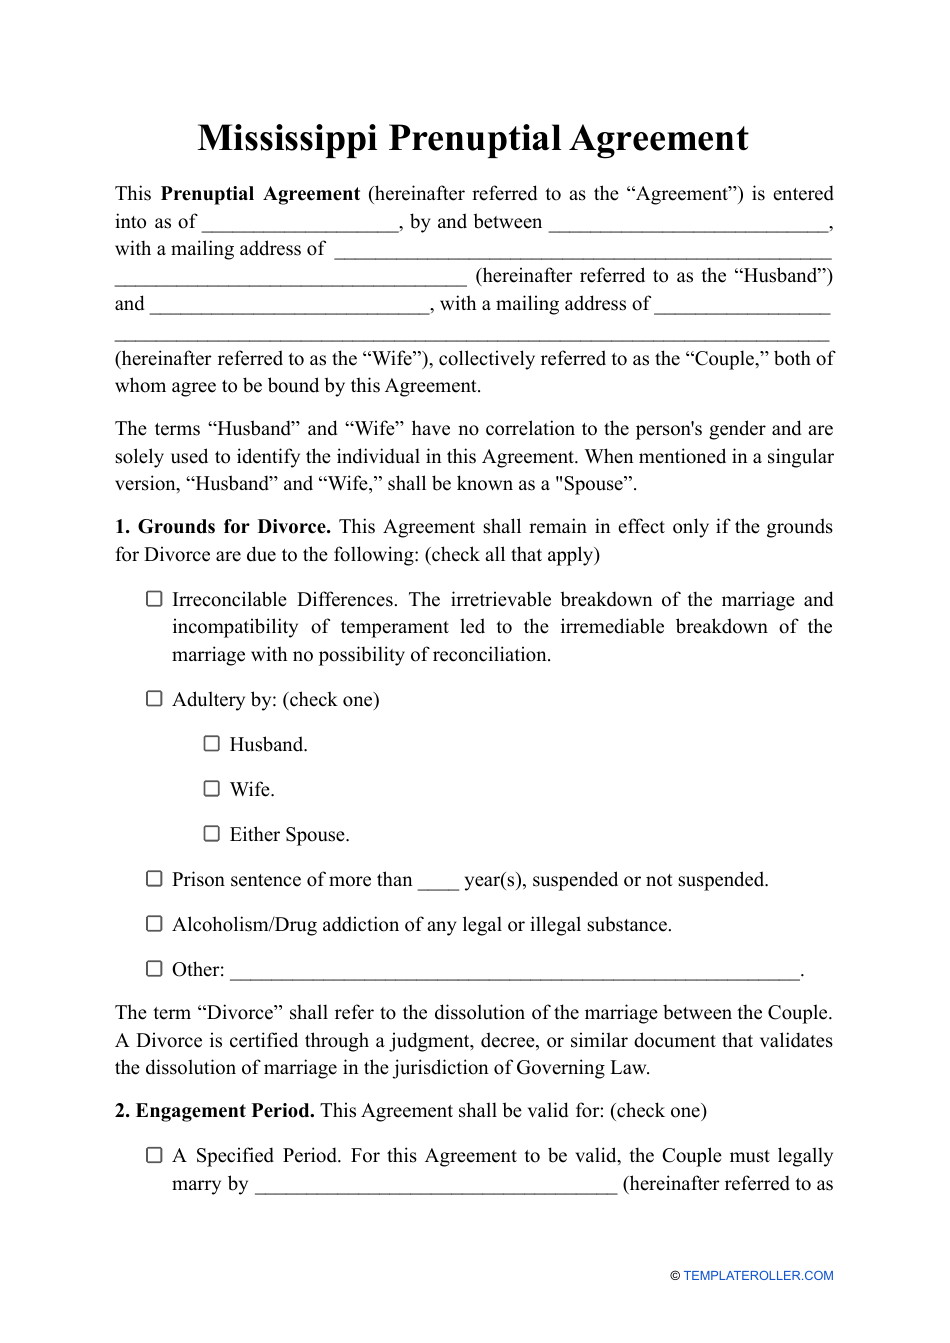 Prenuptial Agreement Template - Mississippi, Page 1